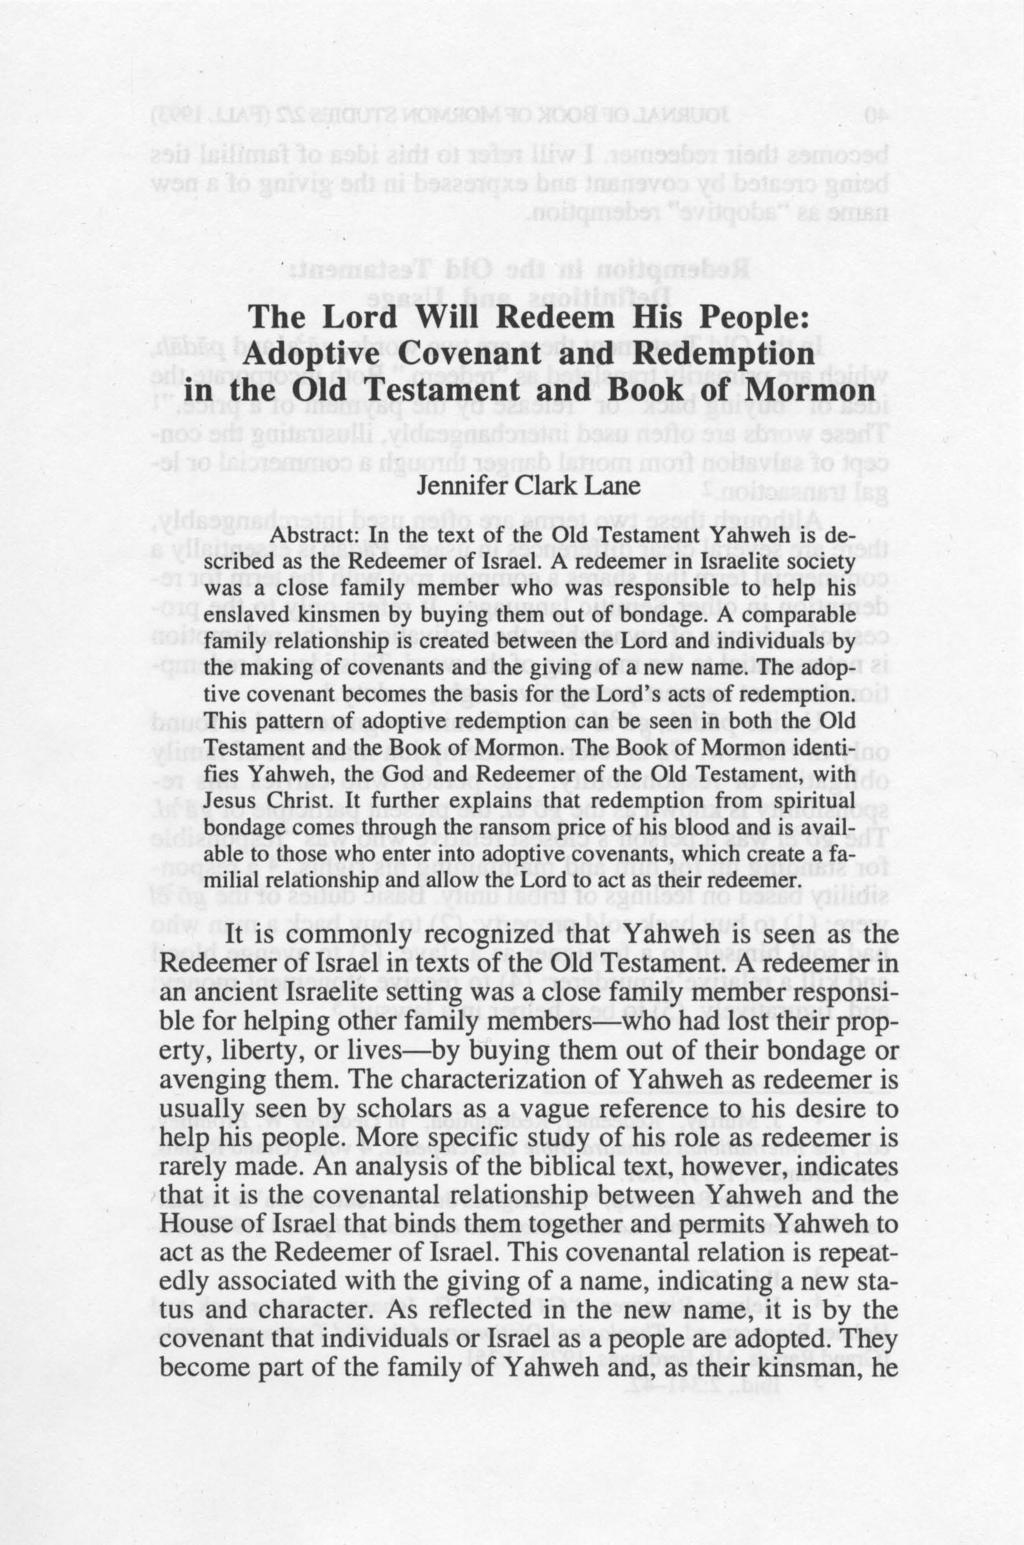 The Lord Will Redeem His People: Adoptive Covenant and Redemption in the Old Testament and Book of Mormon Jennifer Clark Lane Abstract: In the text of the Old Testament Yahweh is described as the